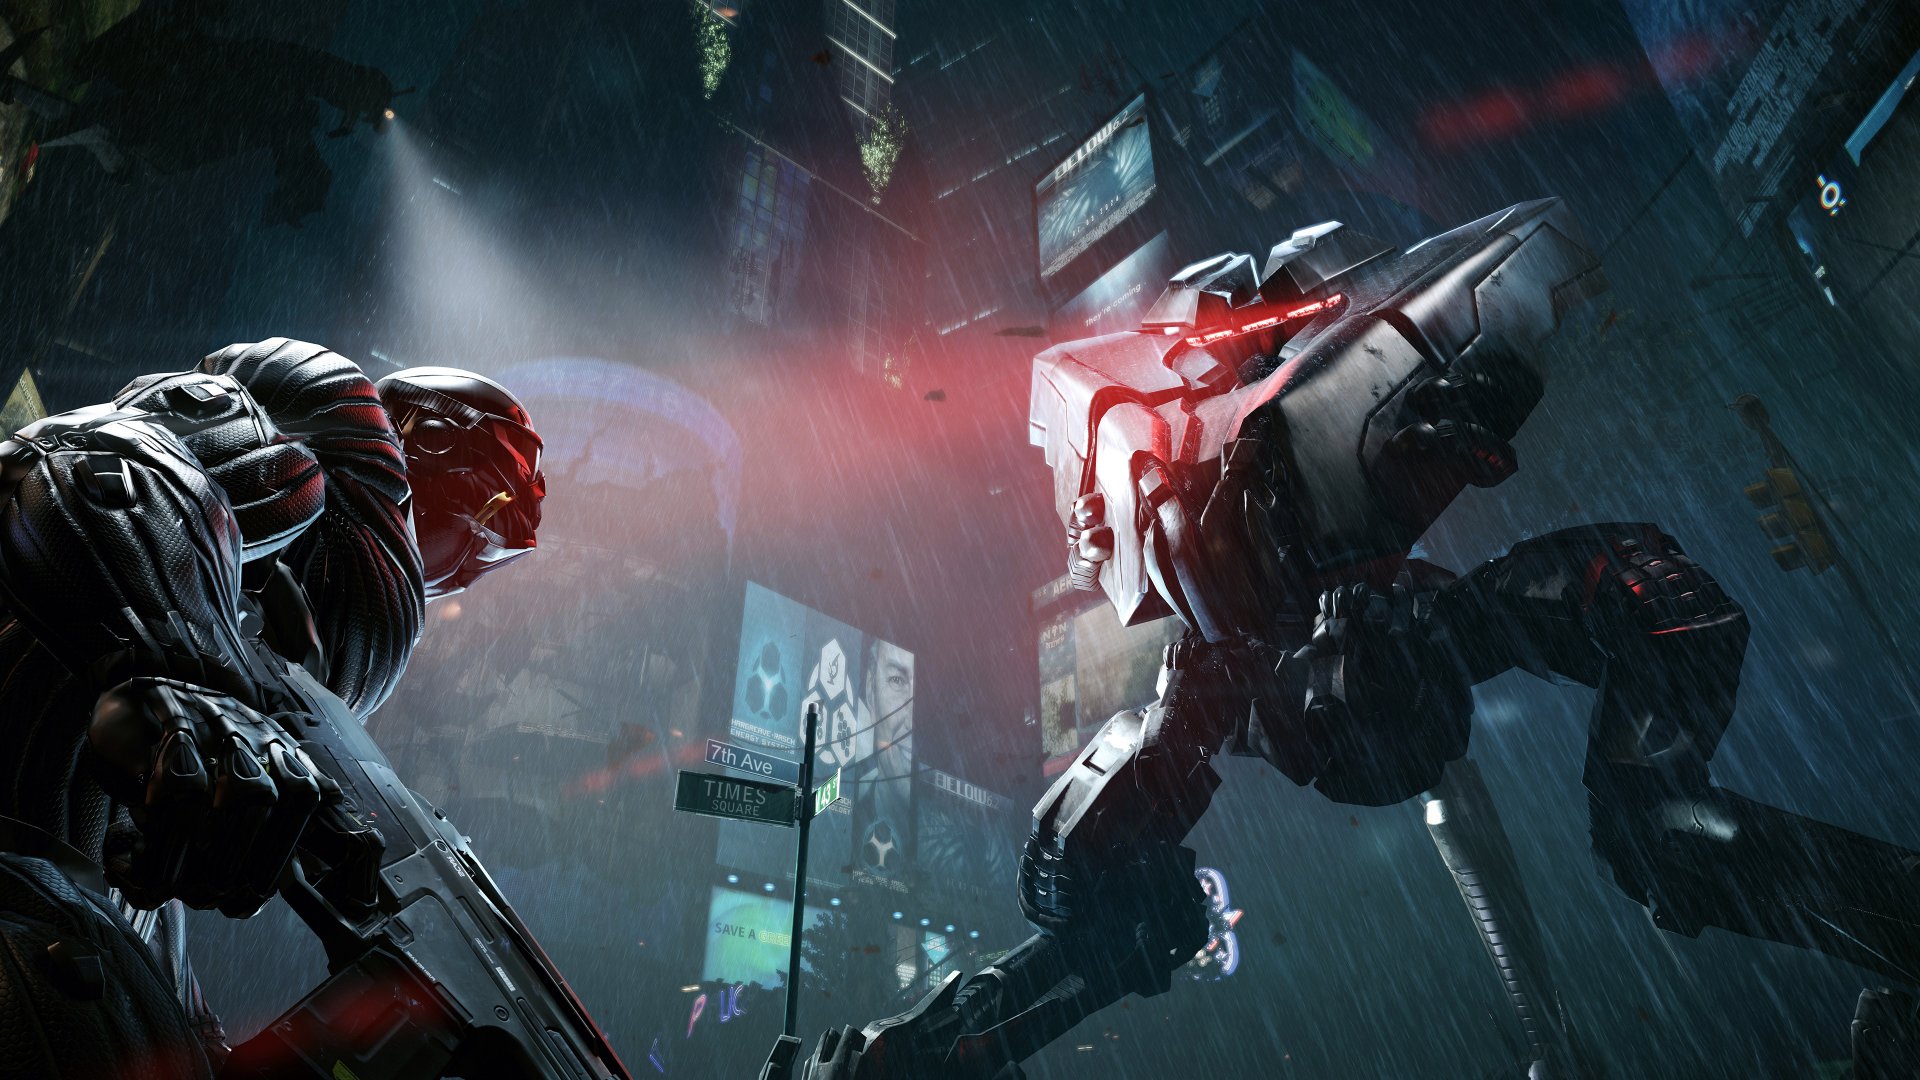 Crysis 2 3 Remastered Patch 2 Released, Featuring Over 500 Fixes & Improvements